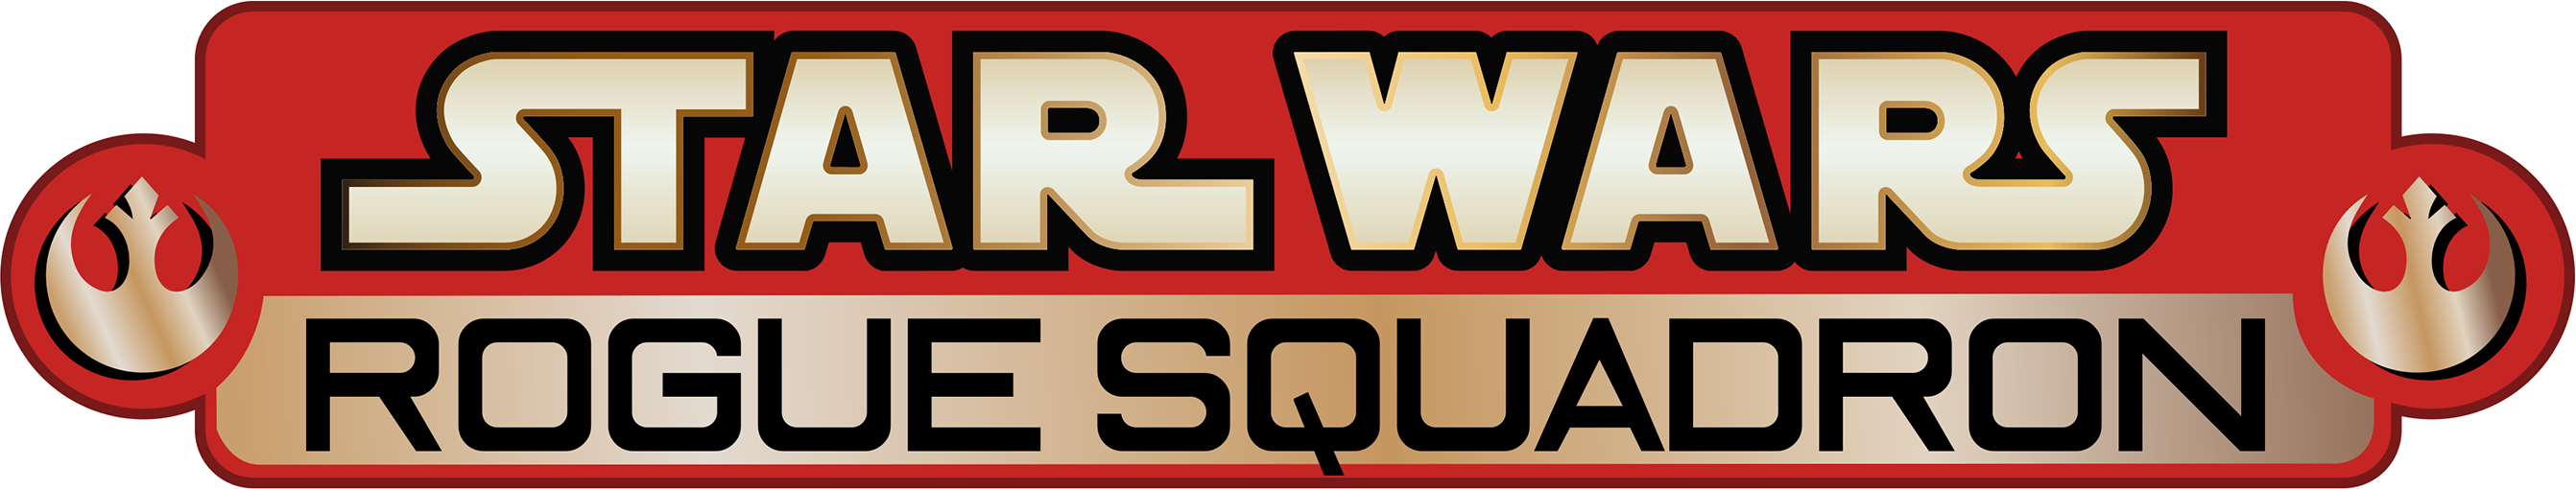 Rogue Squadron N64 level 1 remake